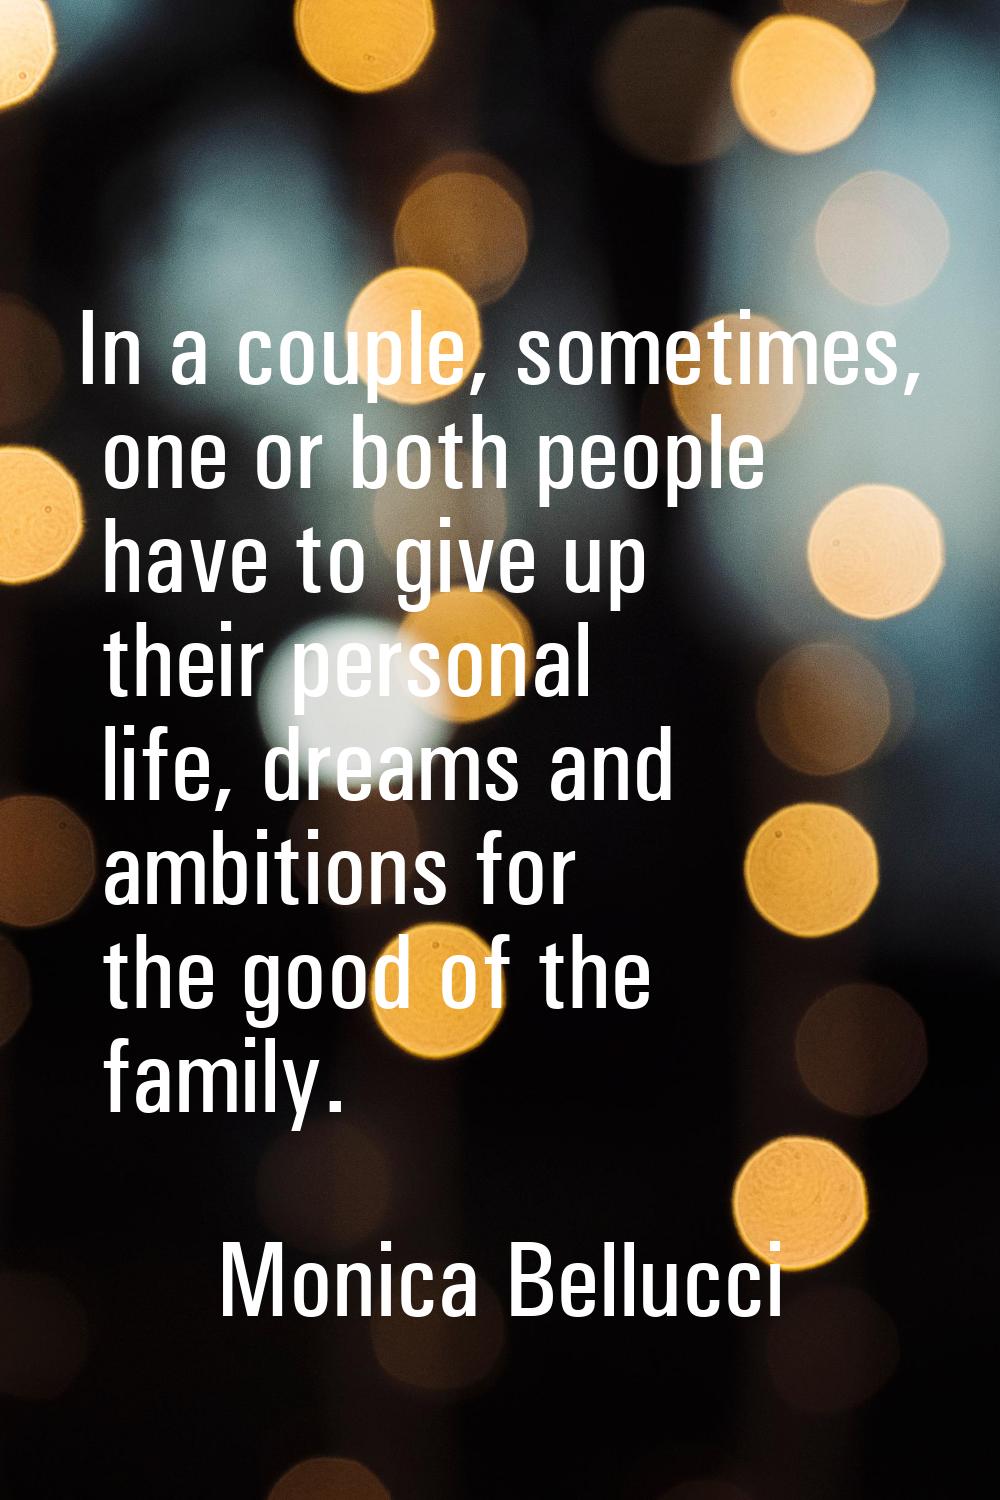 In a couple, sometimes, one or both people have to give up their personal life, dreams and ambition